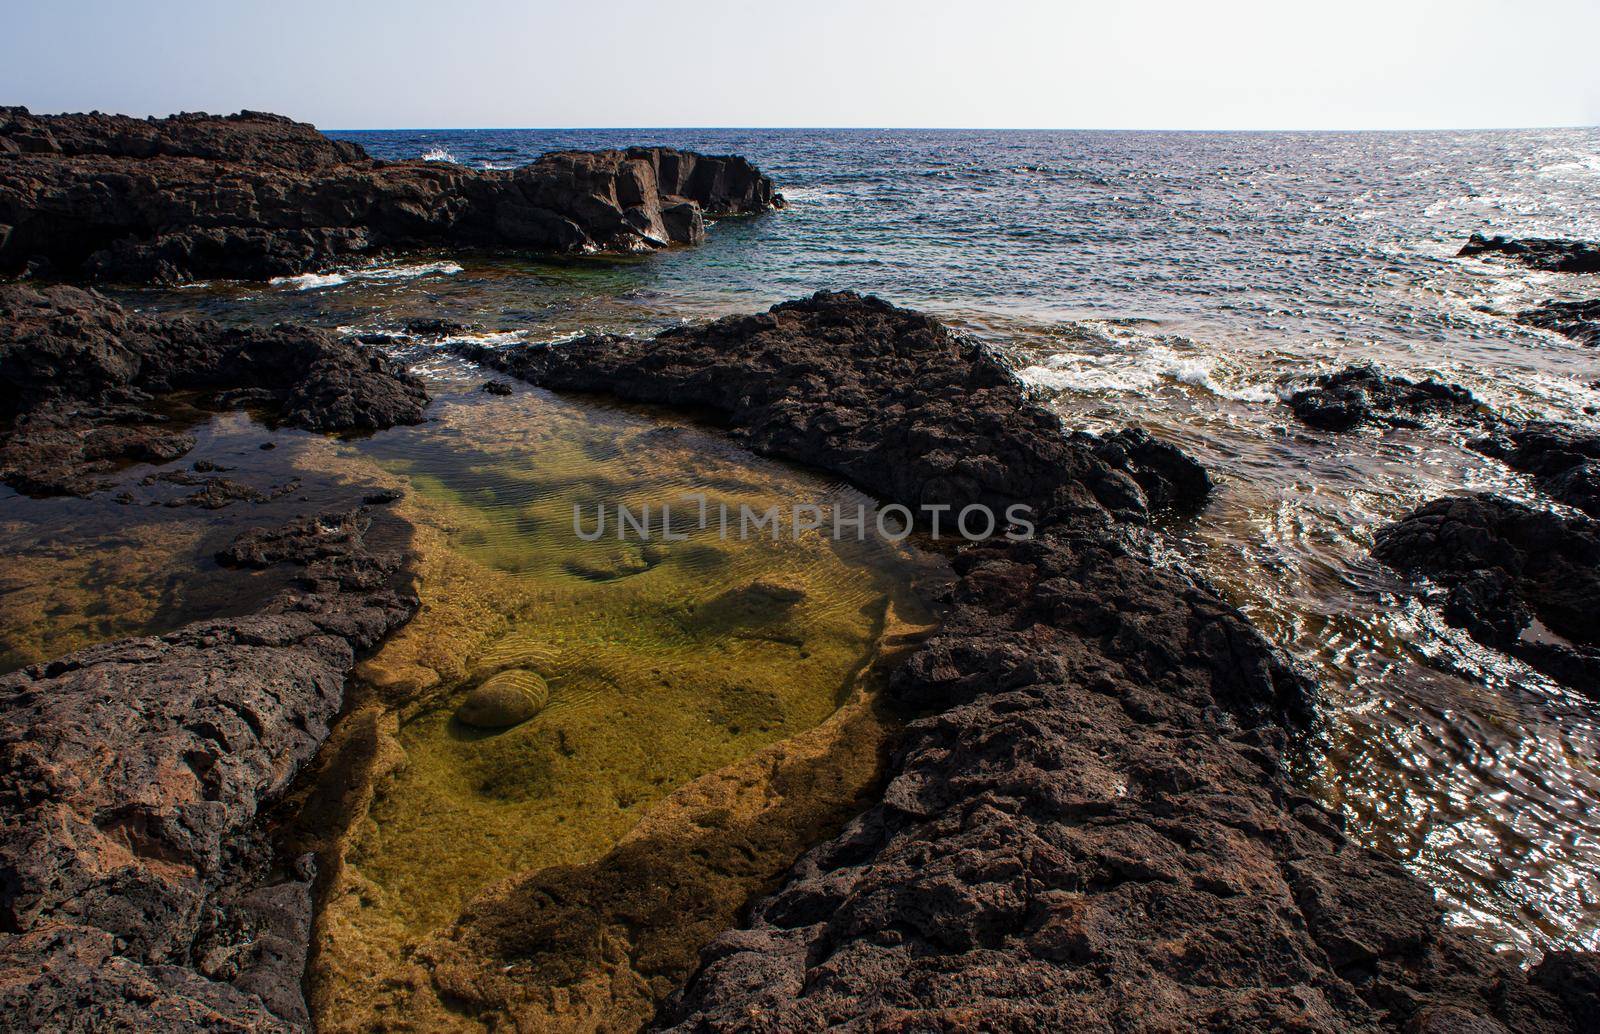 View of the scenic lava rock cliff in the Linosa island. by bepsimage